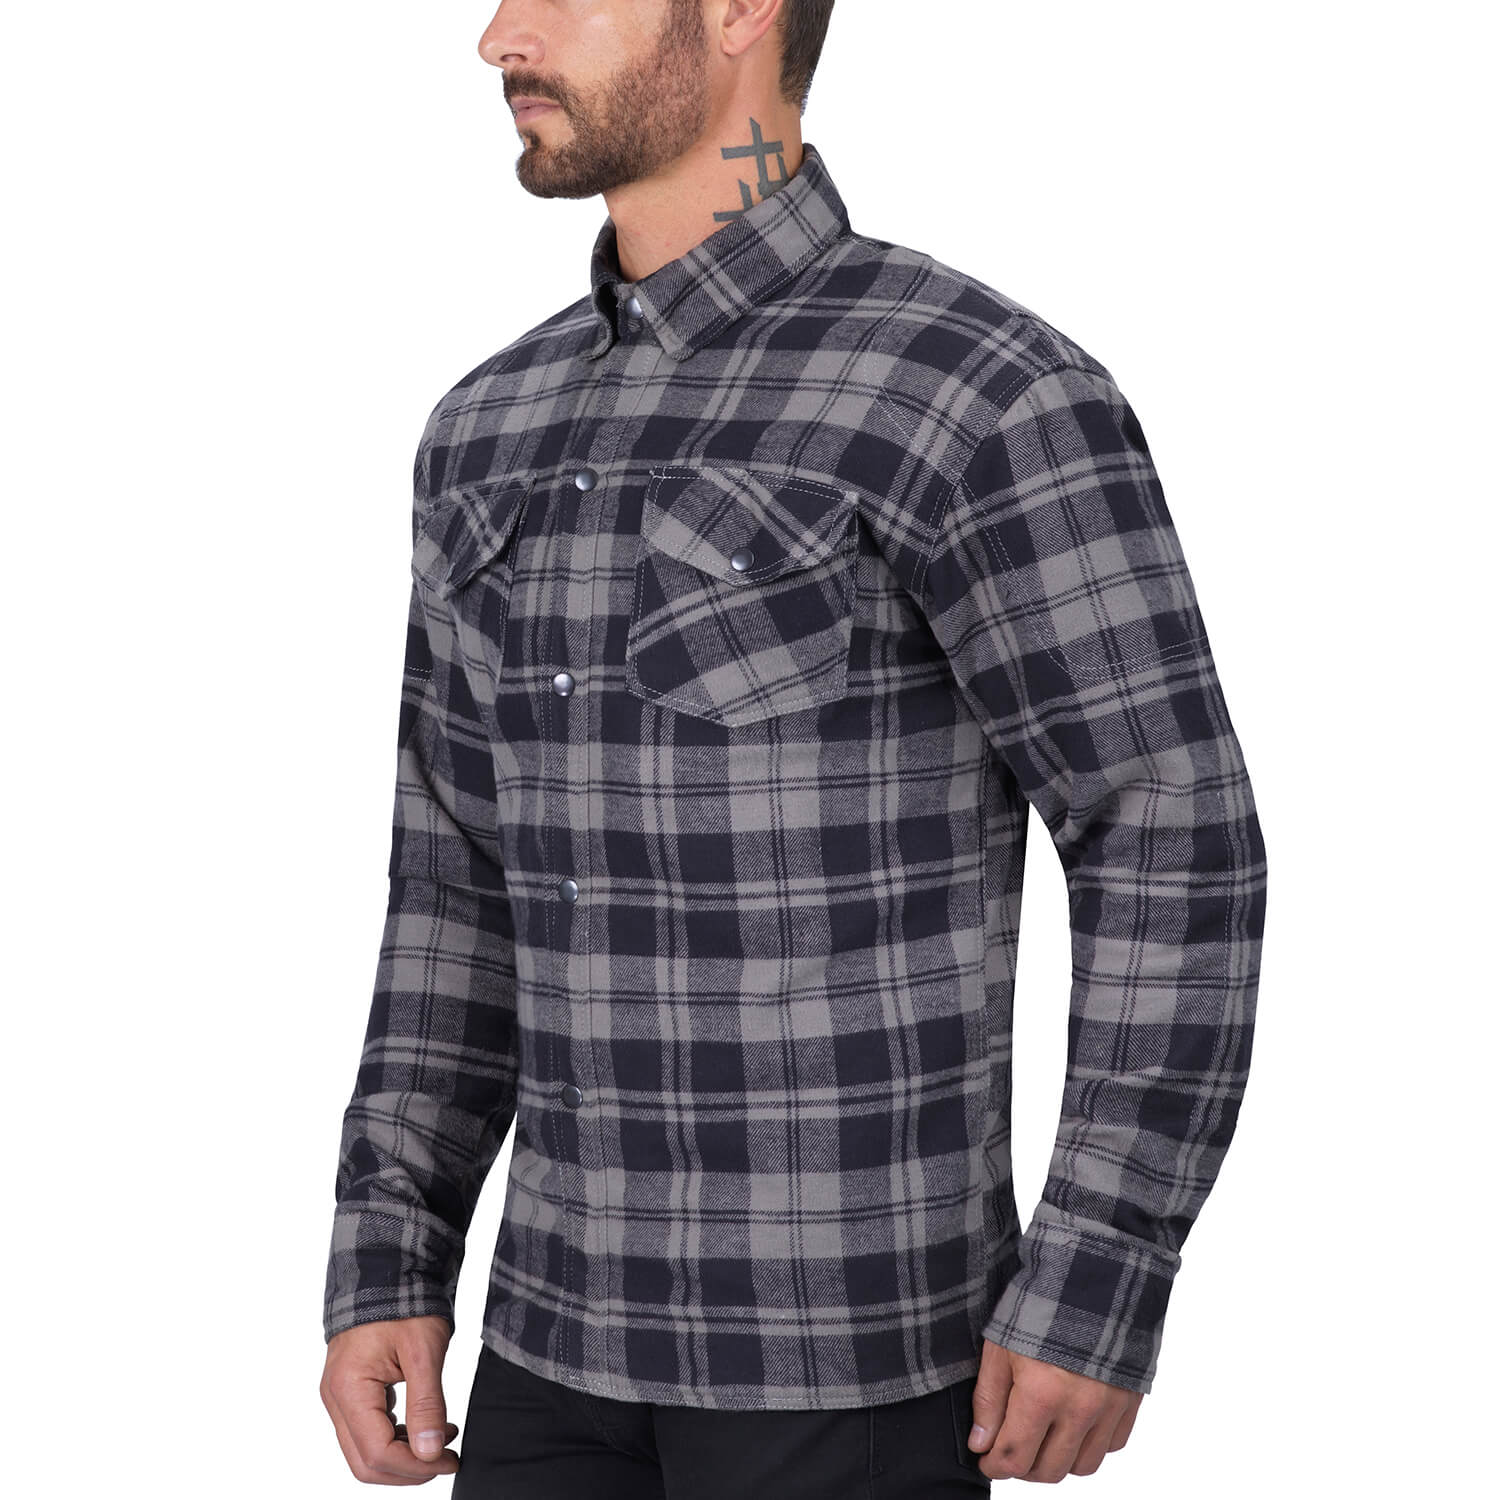 Viking Cycle Motorcycle Flannel Shirt for Biker Men - CE Armor Protection with Multiple Pockets for Storage (Black, Medium)